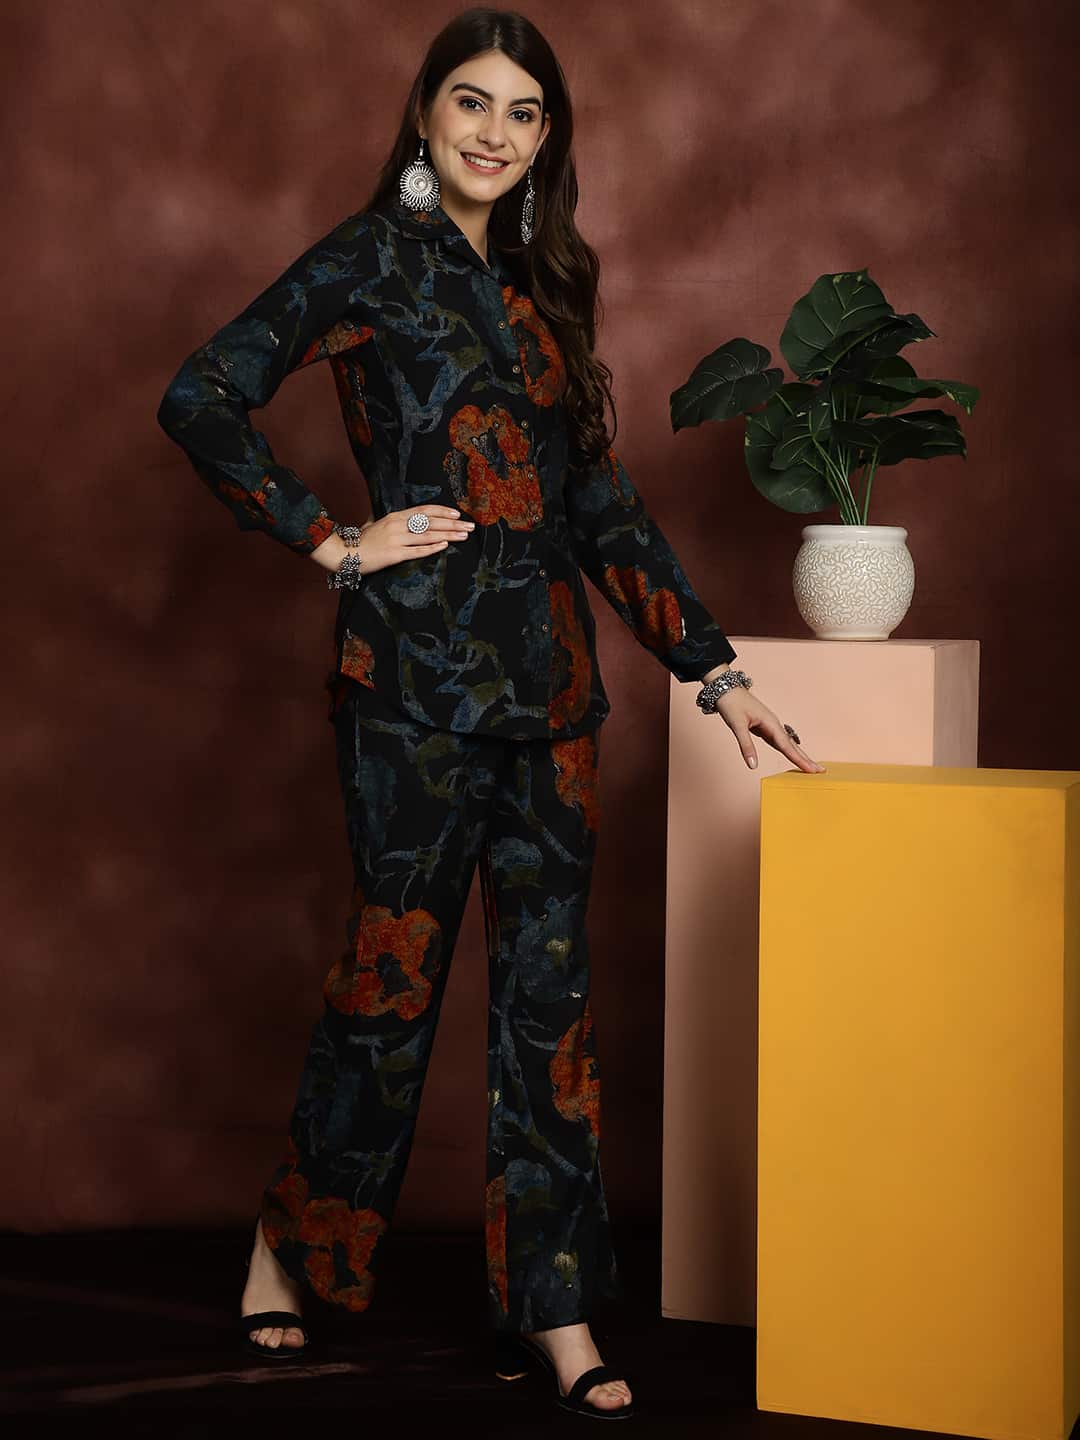 Navy Blue Motif Printed Chanderi Silk Shirt With Trousers Co-ord Set Claura Designs Pvt. Ltd. Cord set Abstract, Chanderi Silk, Co-ord, Co-ord Set, Ethnic, Floral, Navy Blue, Printed